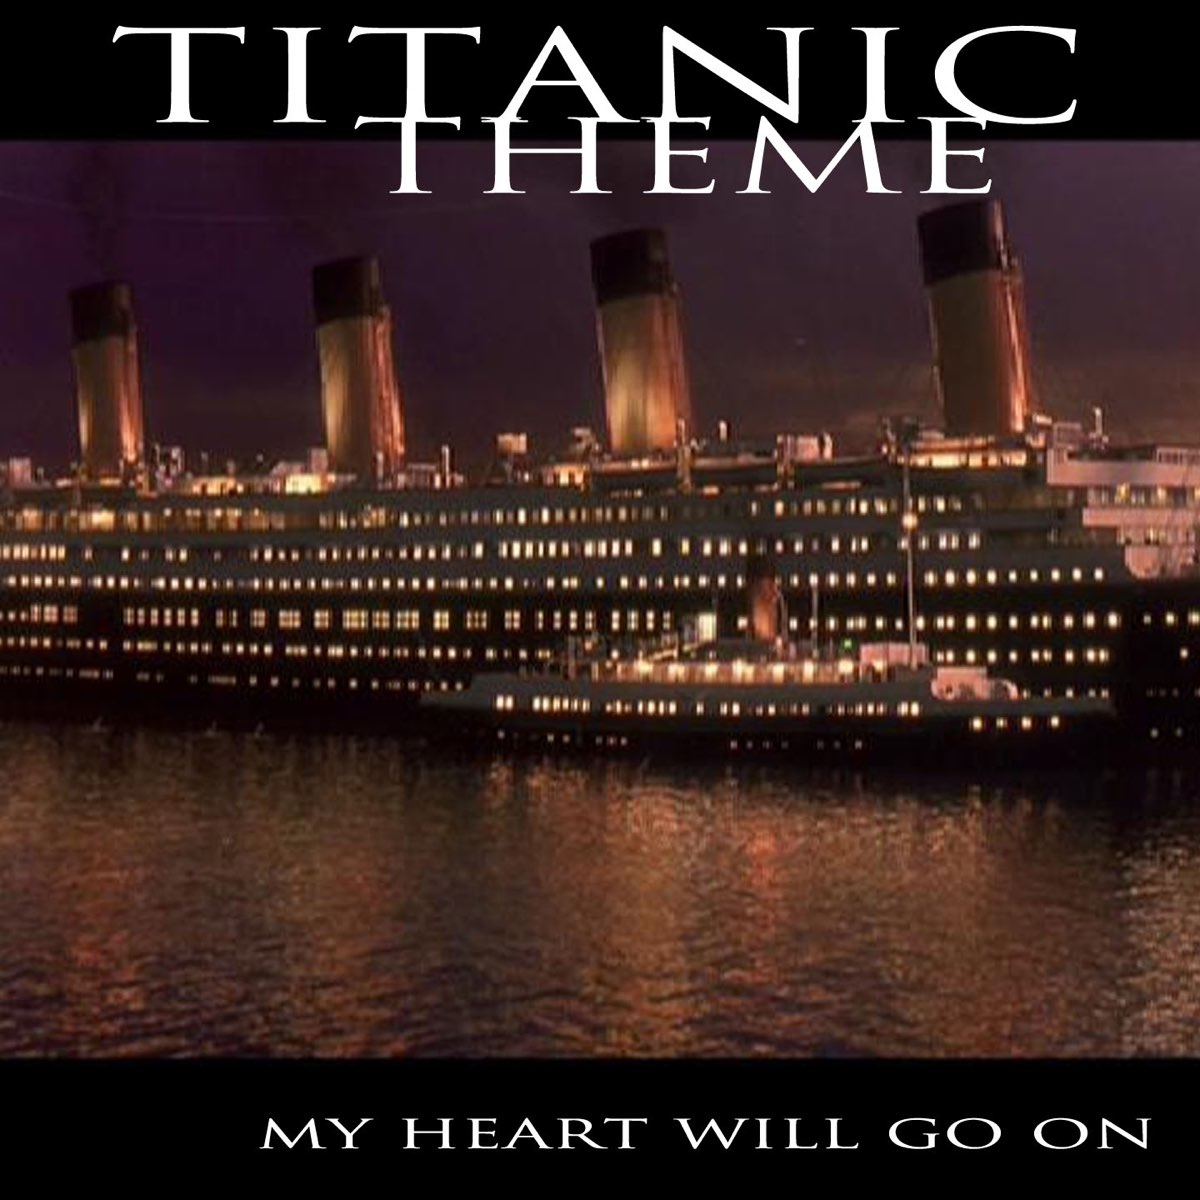 My Heart Will Go On (Theme from "Titanic" - Instrumental version) - Single  - Album by Simplylove - Apple Music